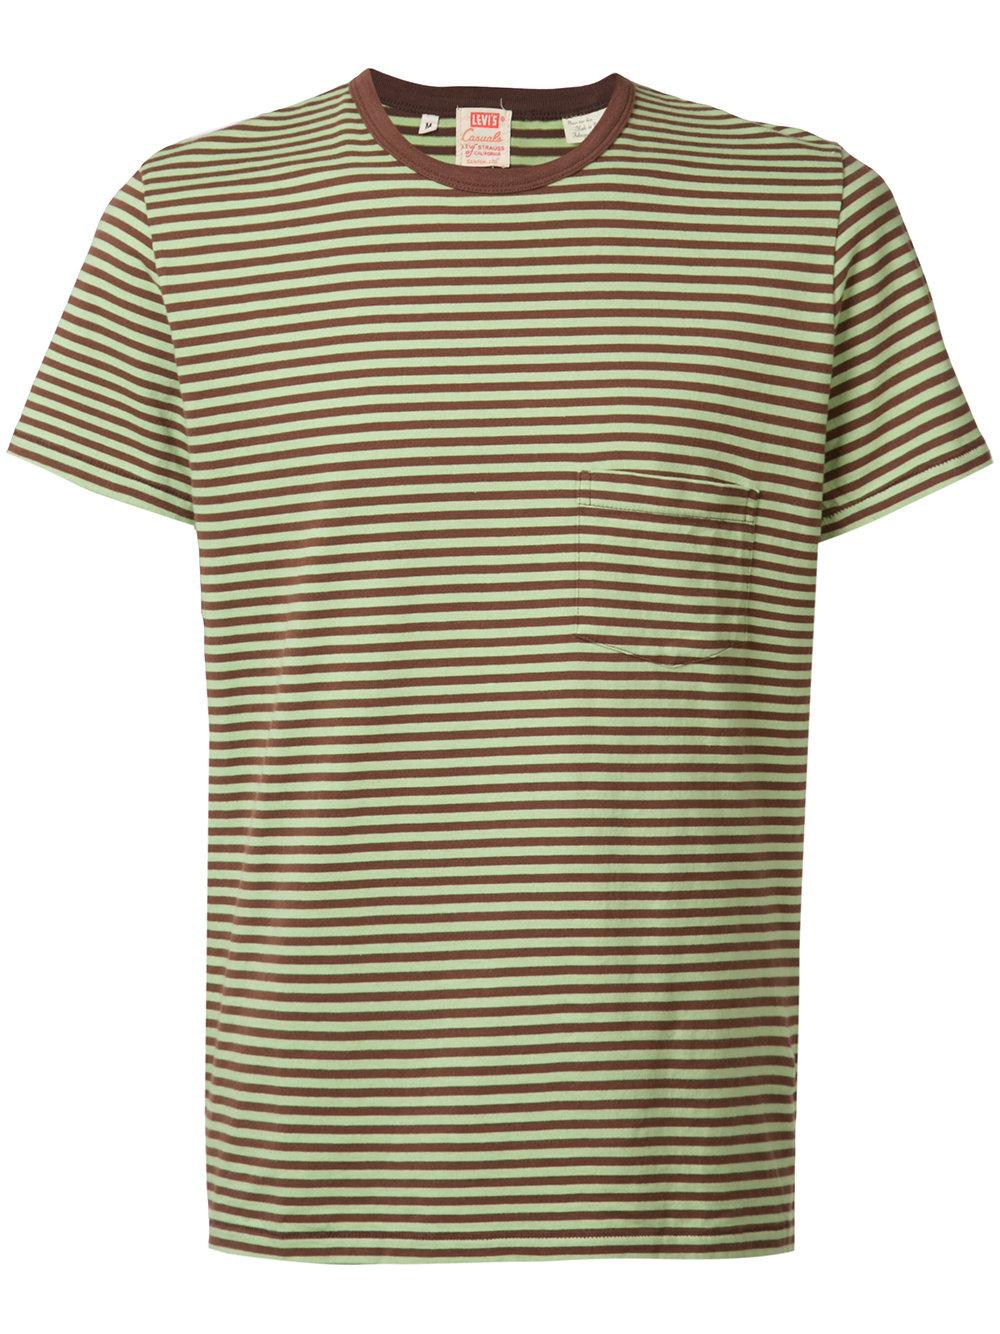 Lyst - Levi'S Striped T-shirt in Brown for Men